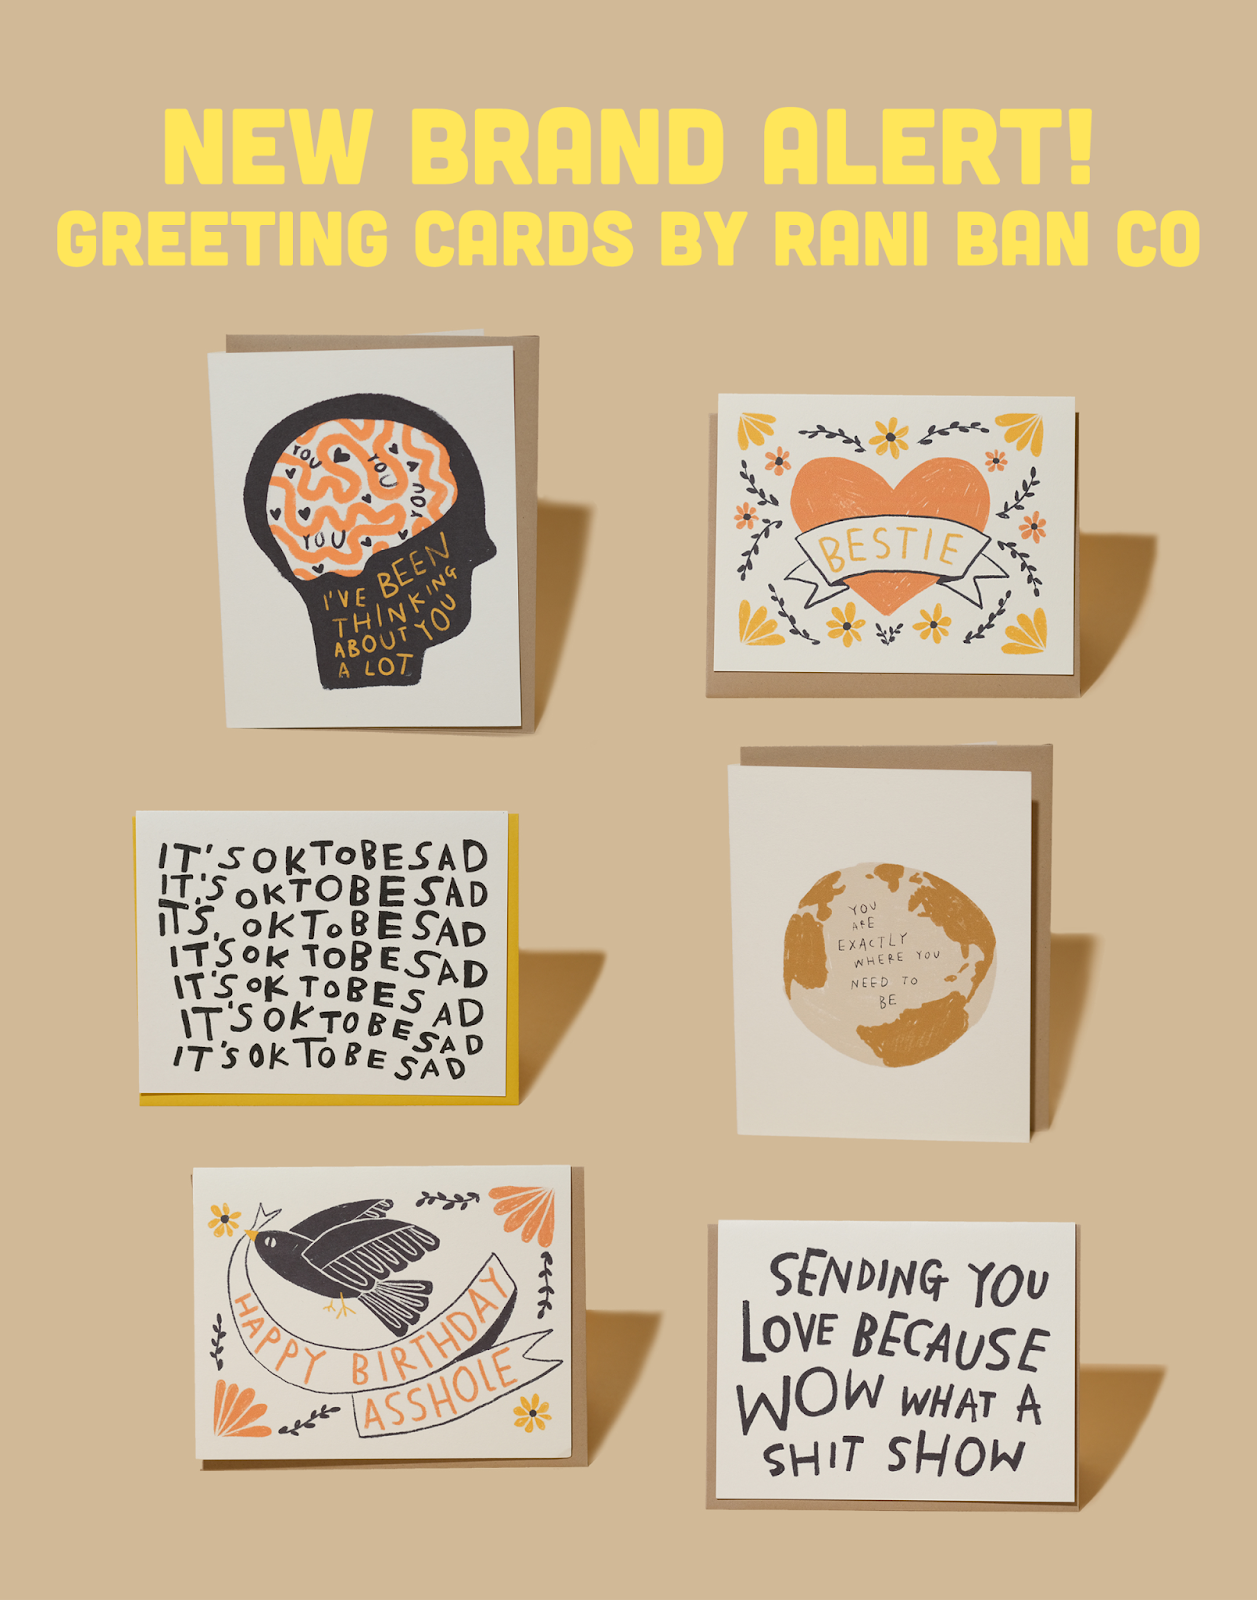 New brand alert! We now carry greeting cards by rani ban co